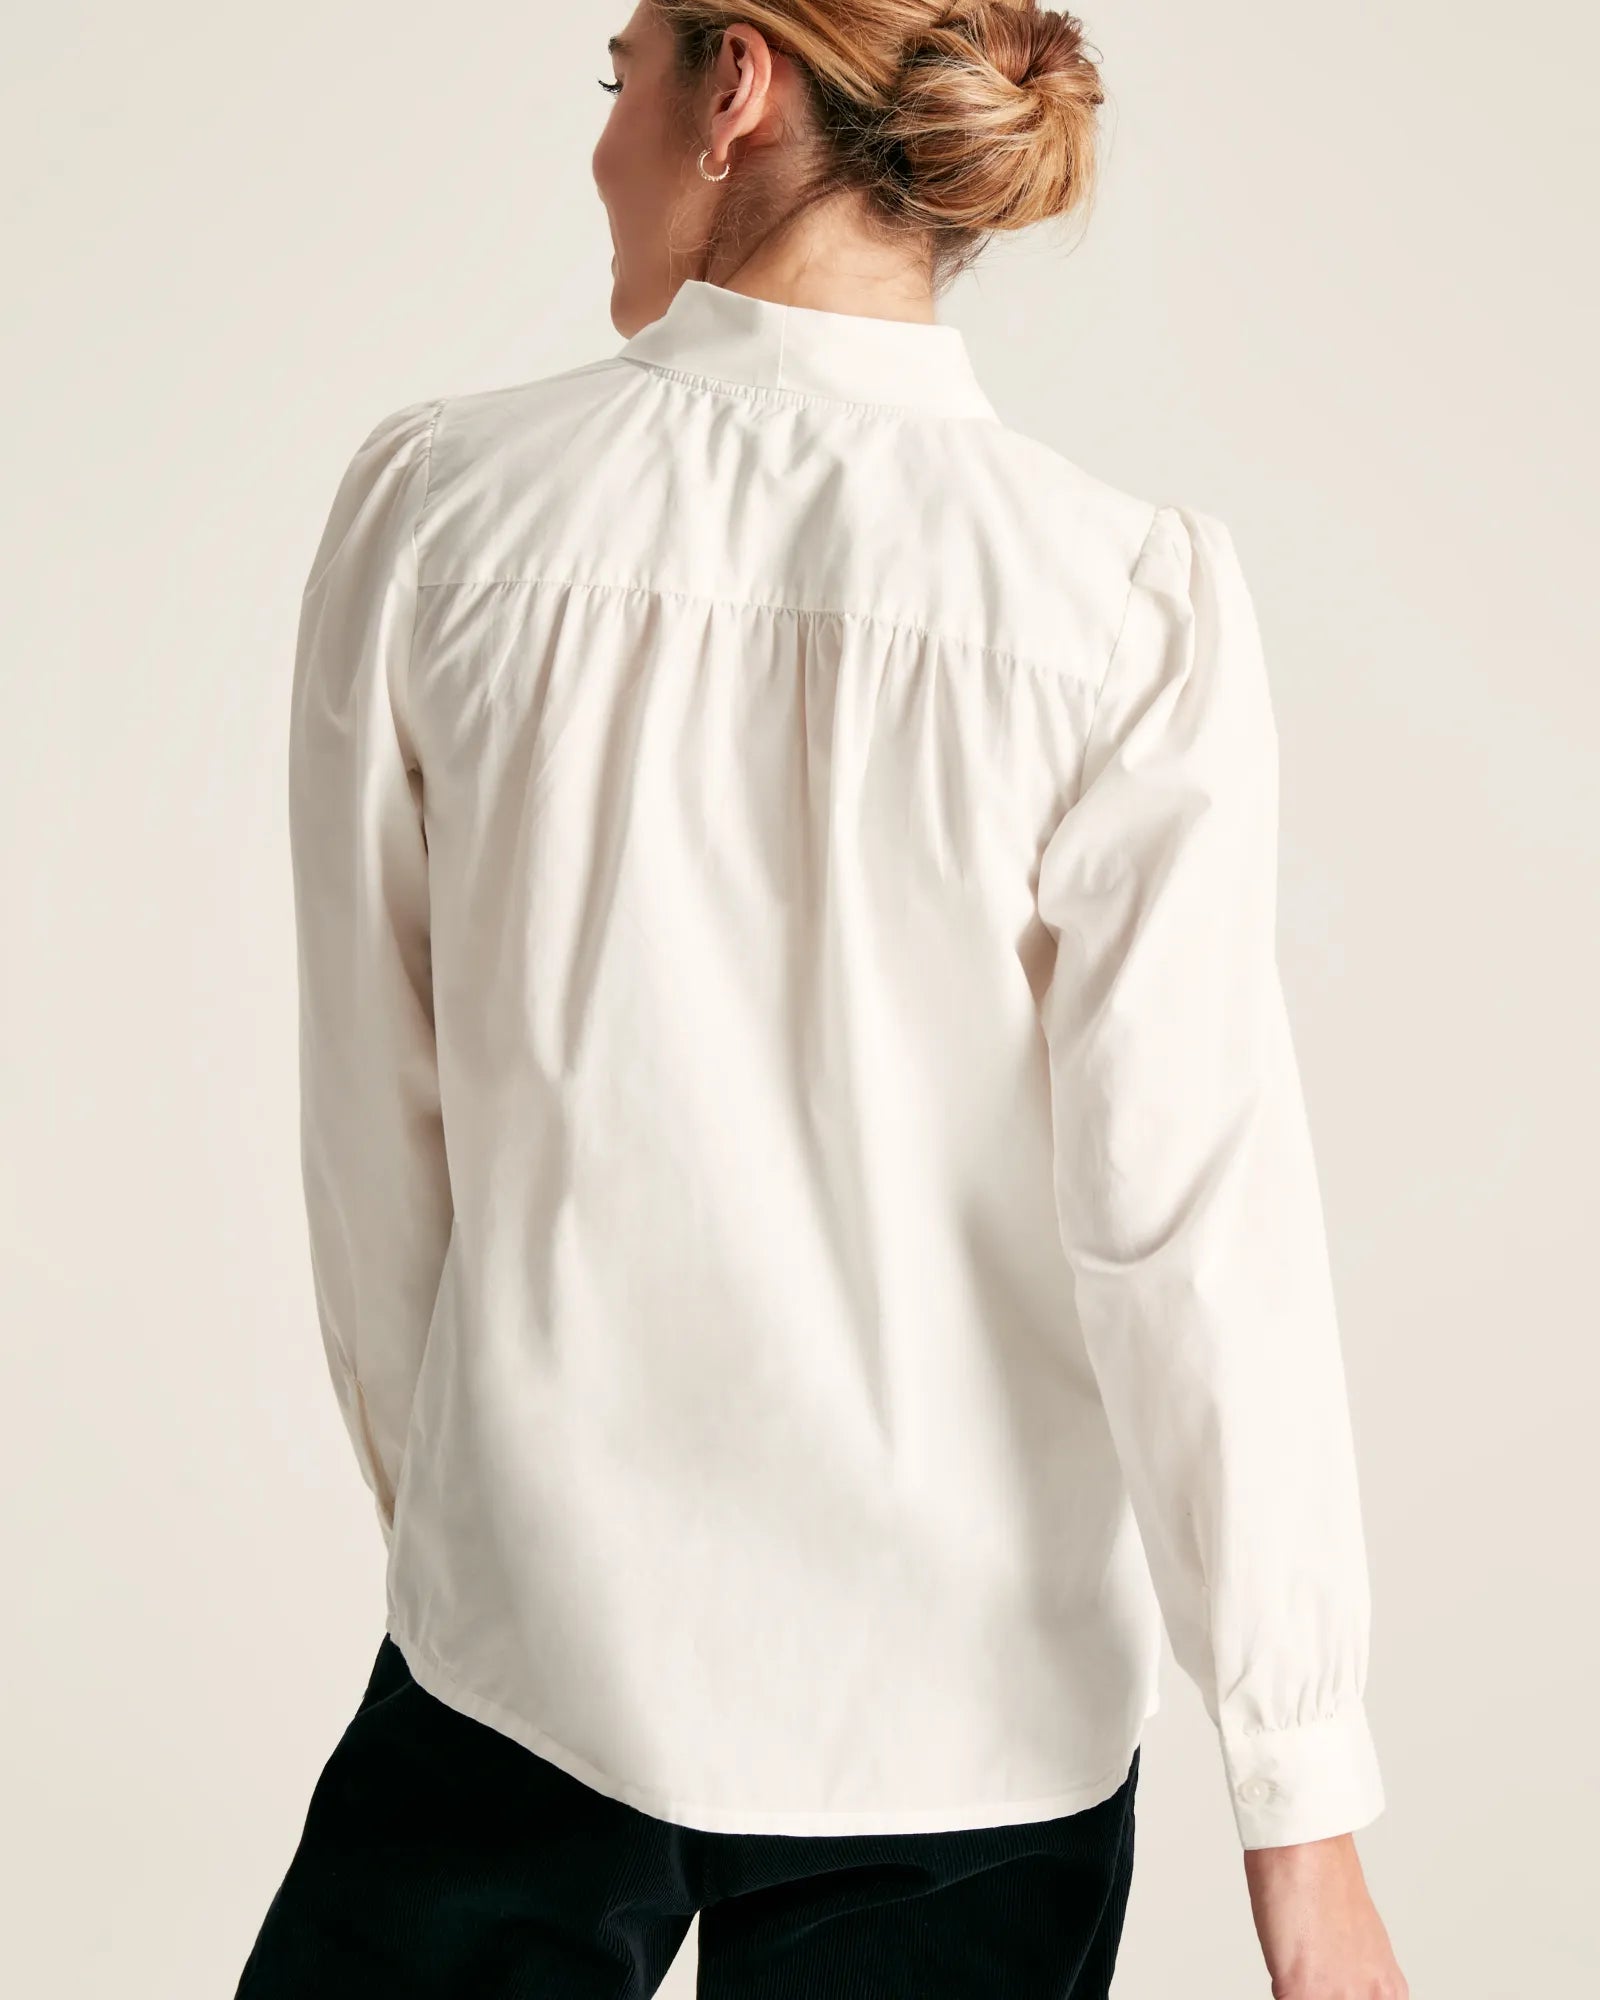 Everly White Tie Neck Blouse